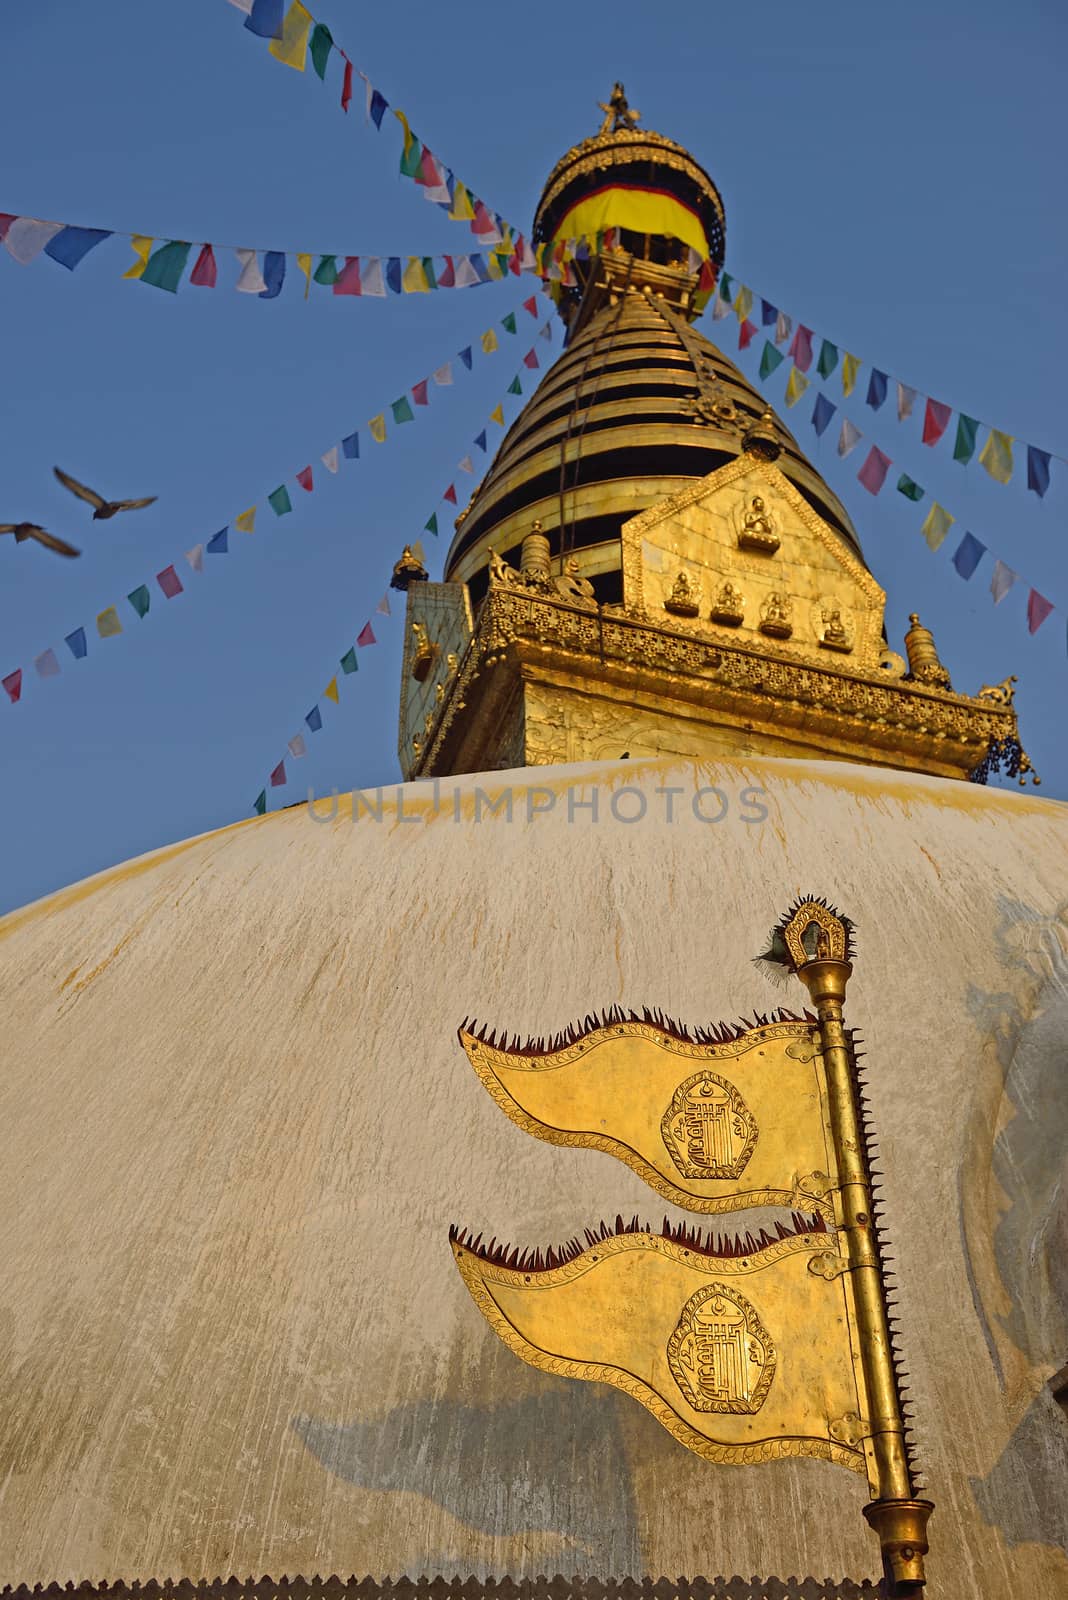 The golden flag is located at the Swayambhunath Temple in Nepal